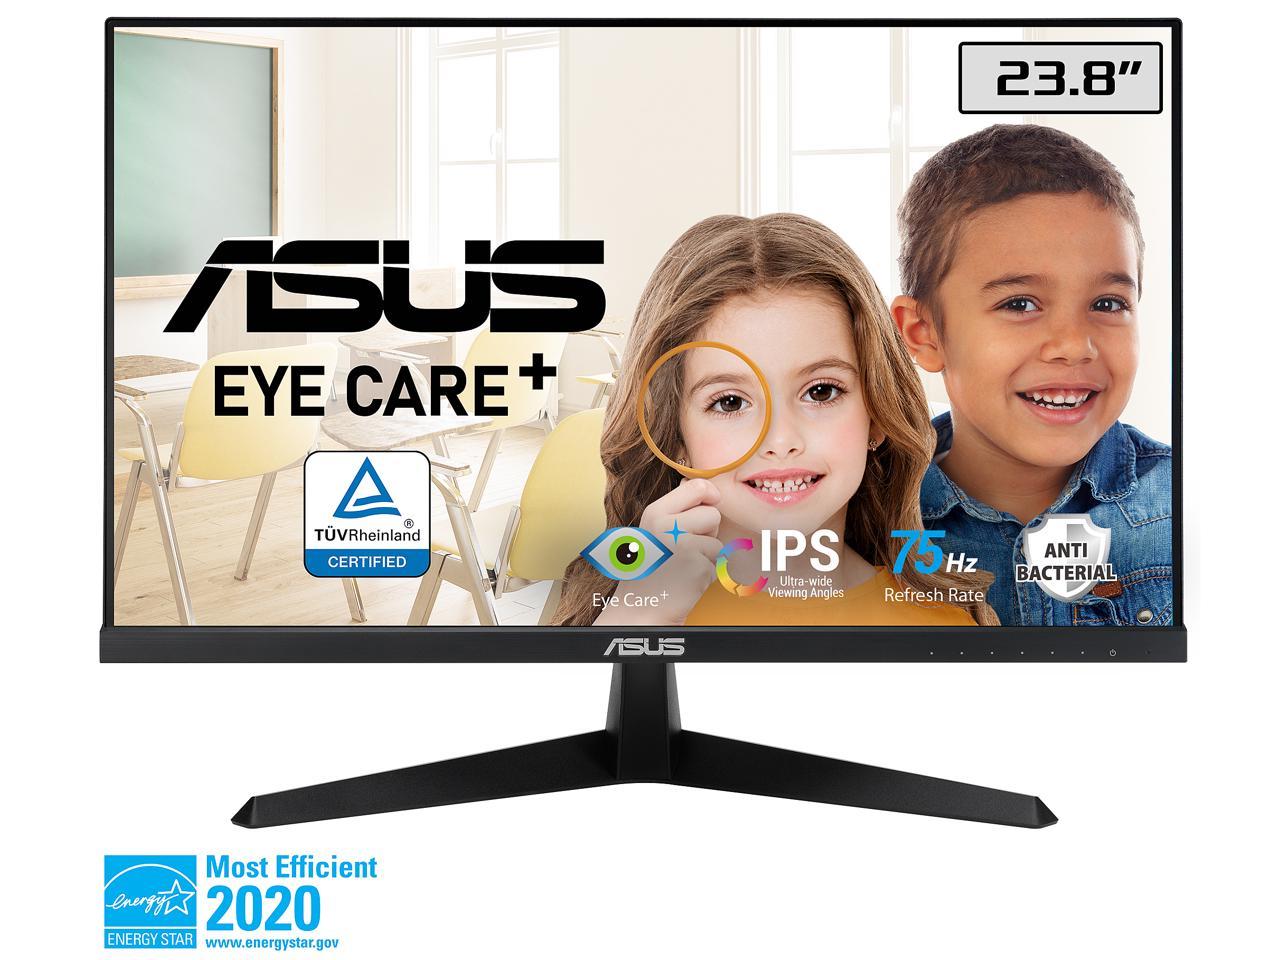 ASUS MNTR ASUS 23.8" 75HZ IPS VY249HE R